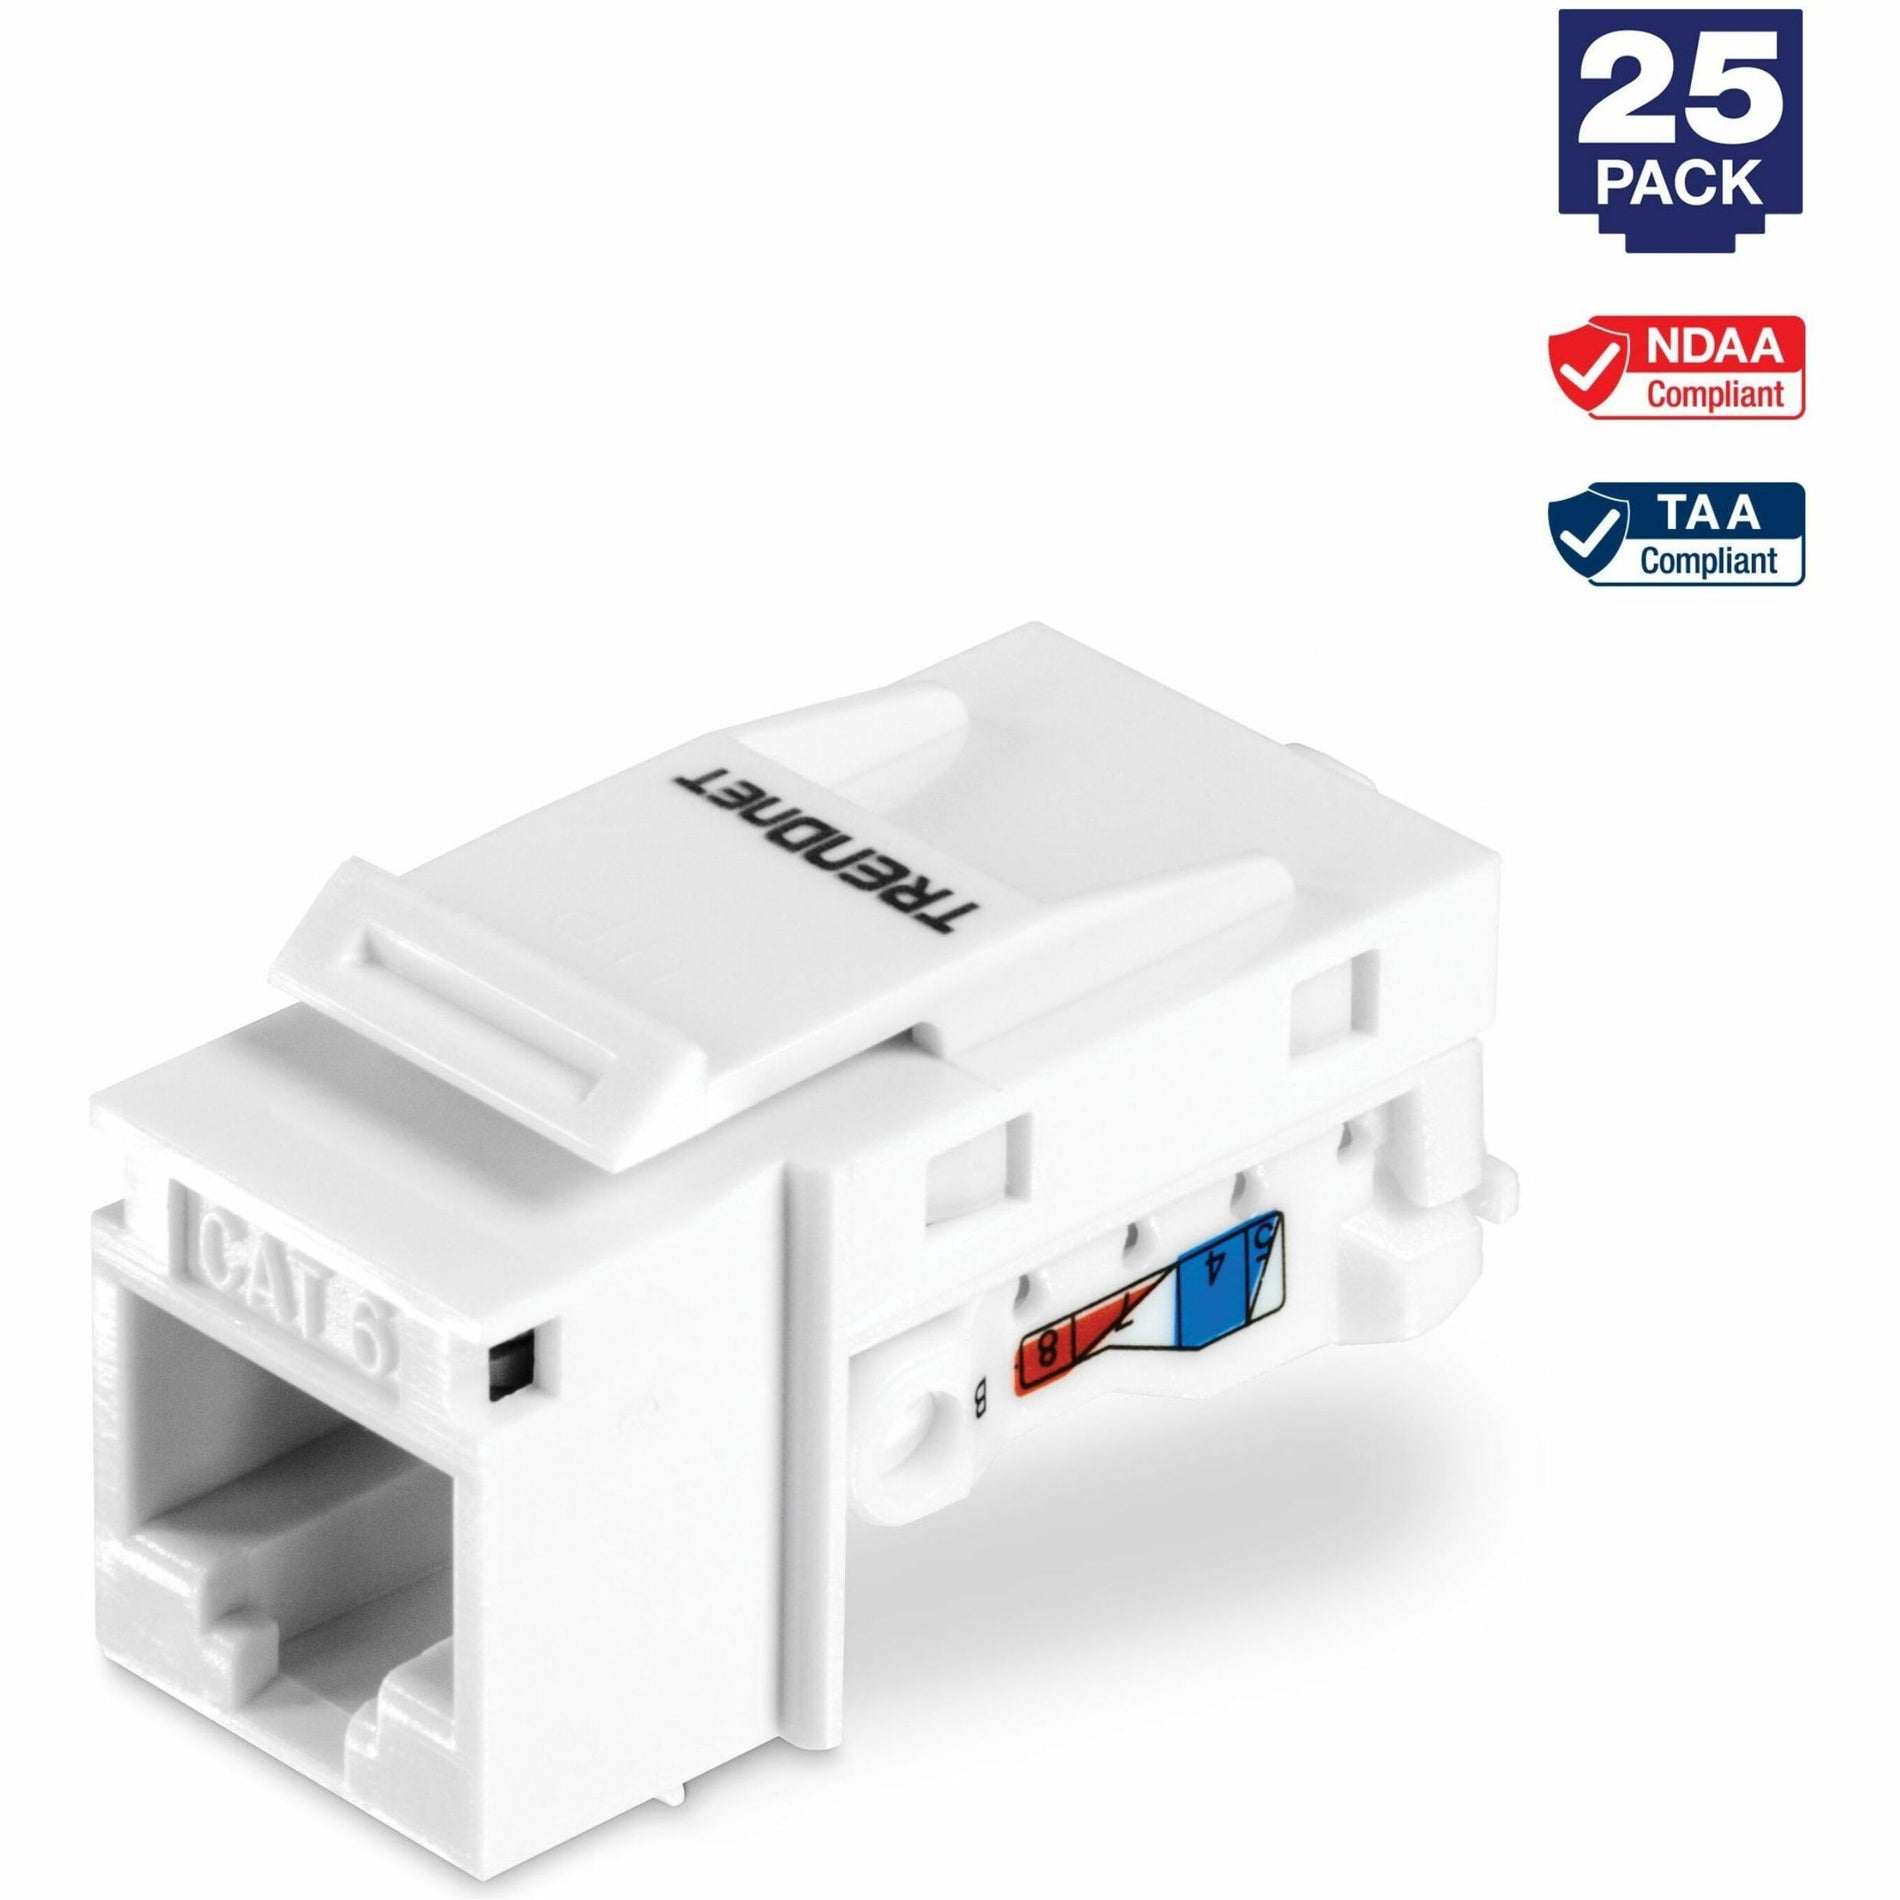 TRENDnet TC-K25C6 25 Pack Cat6 RJ-45 Keystone Jack, 90° Angle Termination, Color-Coded Labeling, Gold-Plated Contacts, Tool-less Design